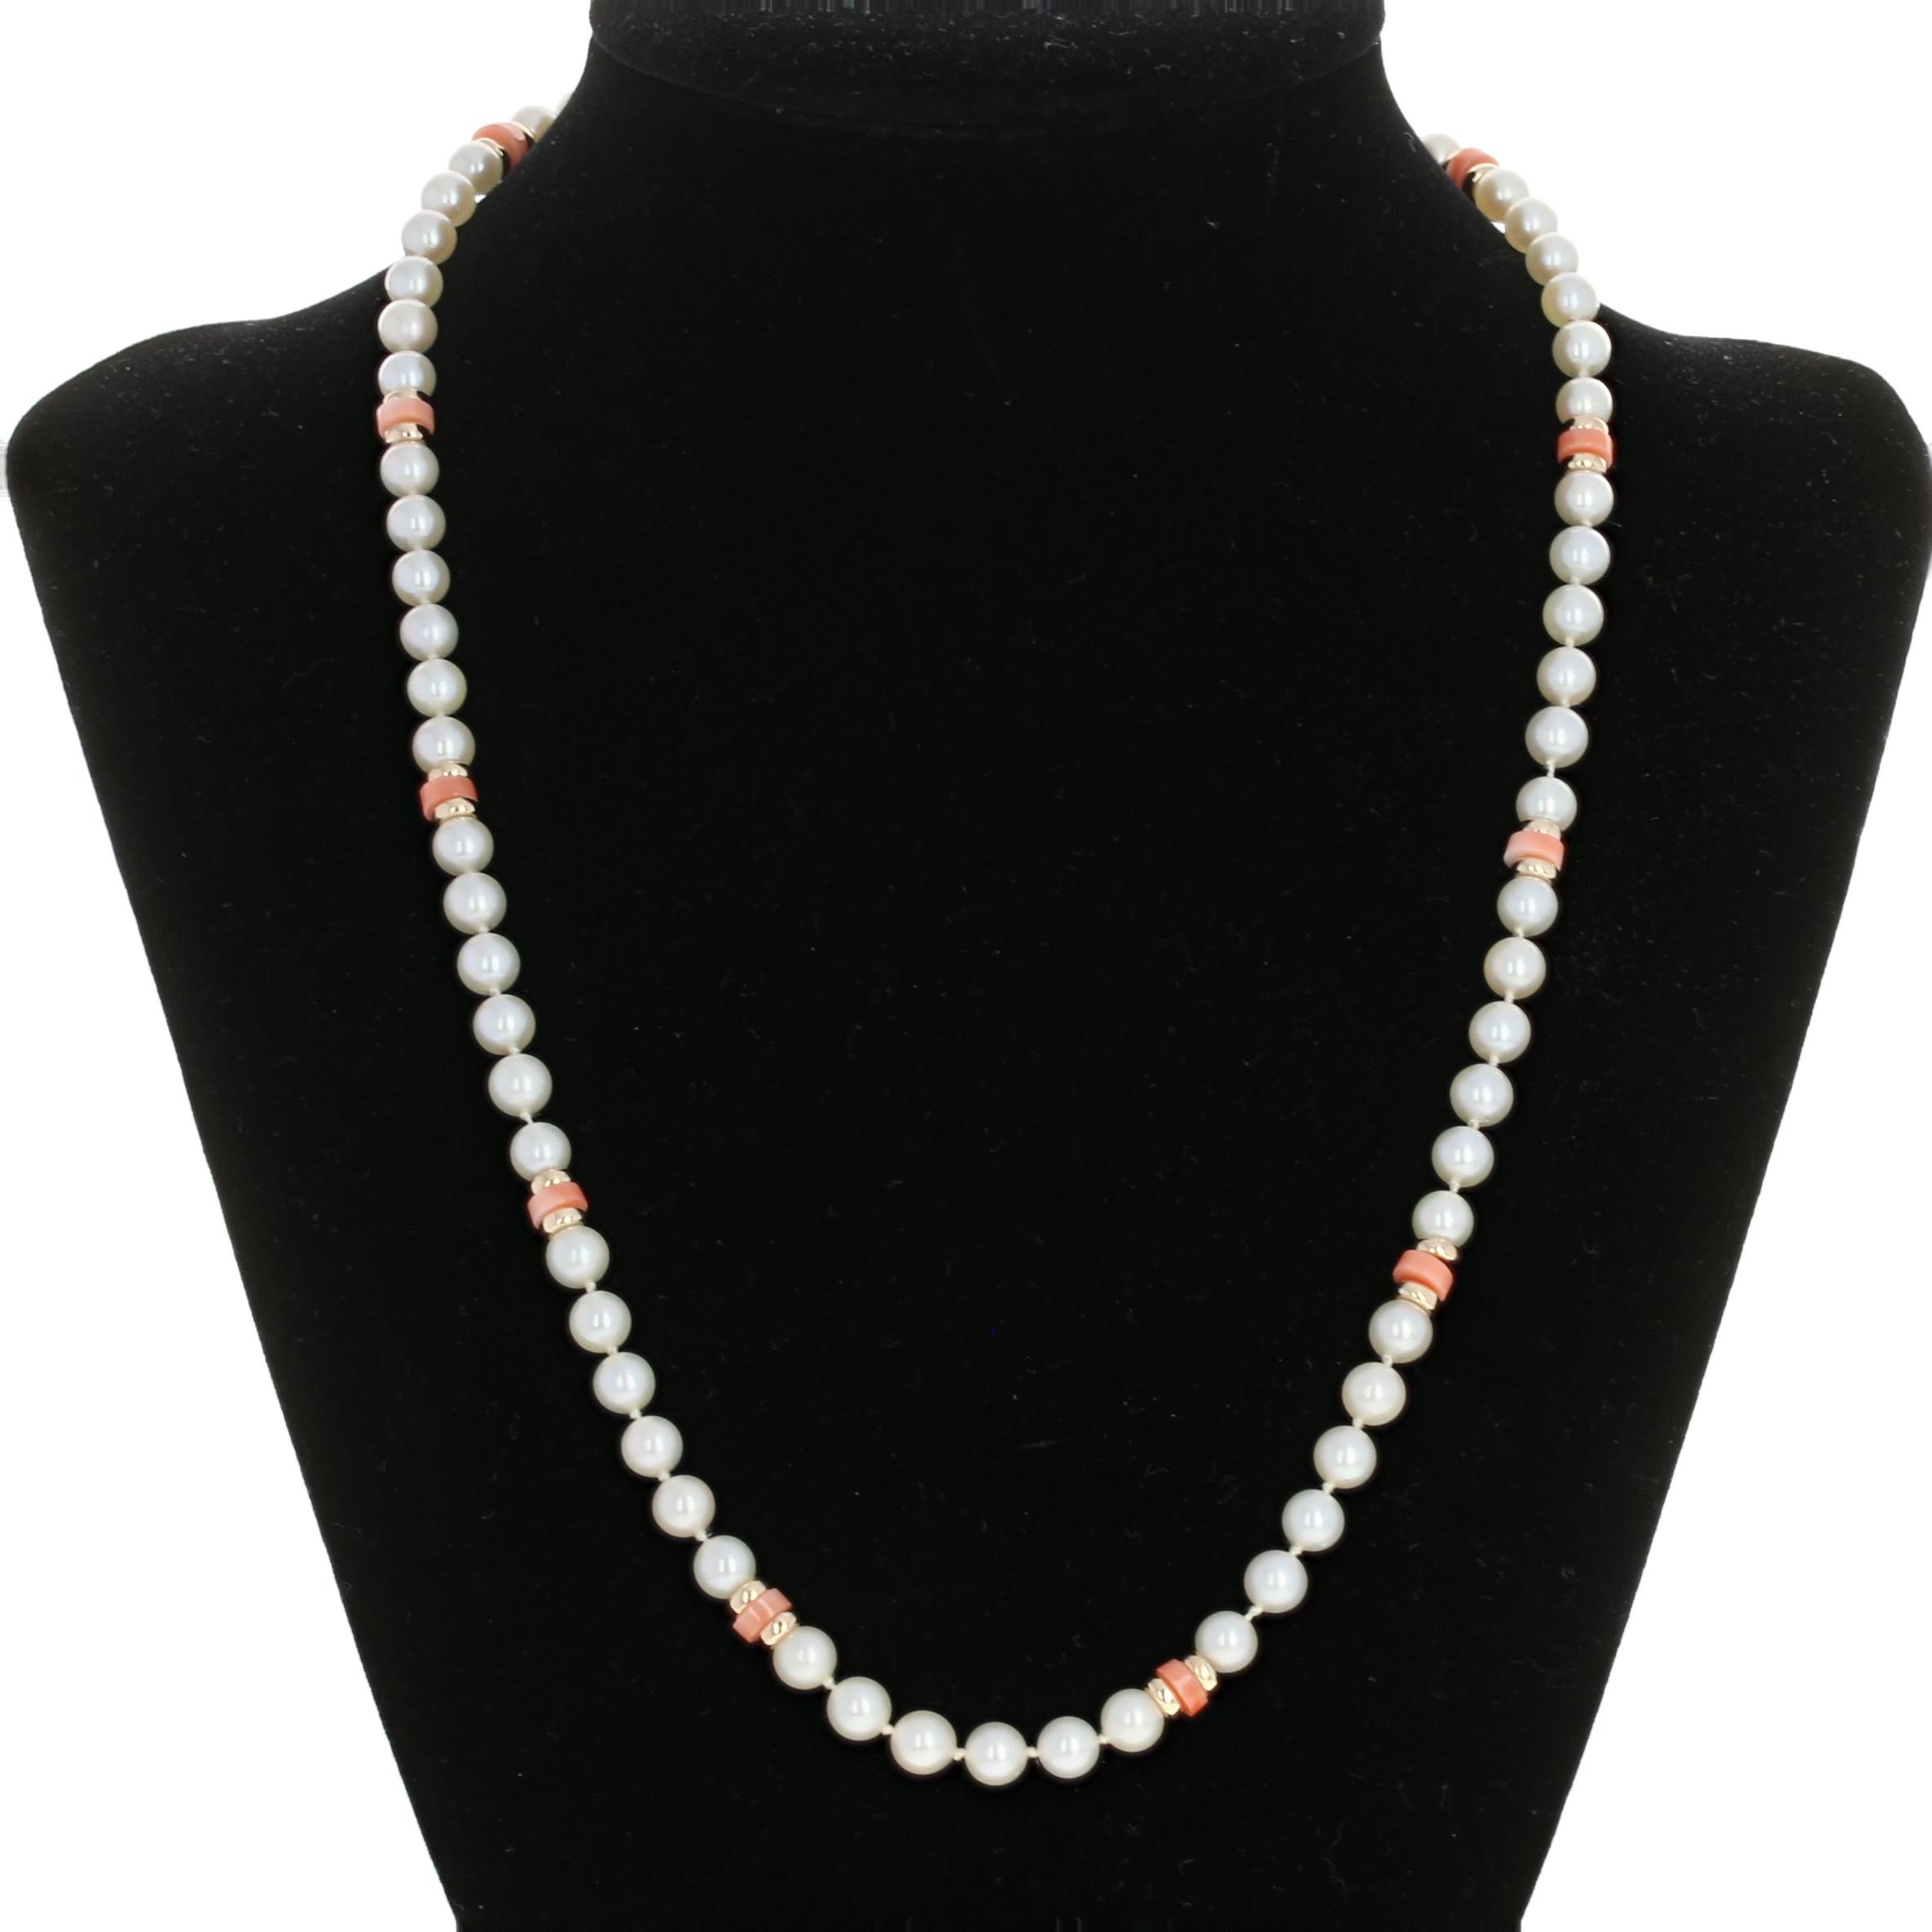 Metal Content: Guaranteed 14k Gold as stamped

Stone Information: 
Freshwater Pearls 
Genuine Coral 

Necklace Style: Knotted Strand 
Measurements: length 18 1/2